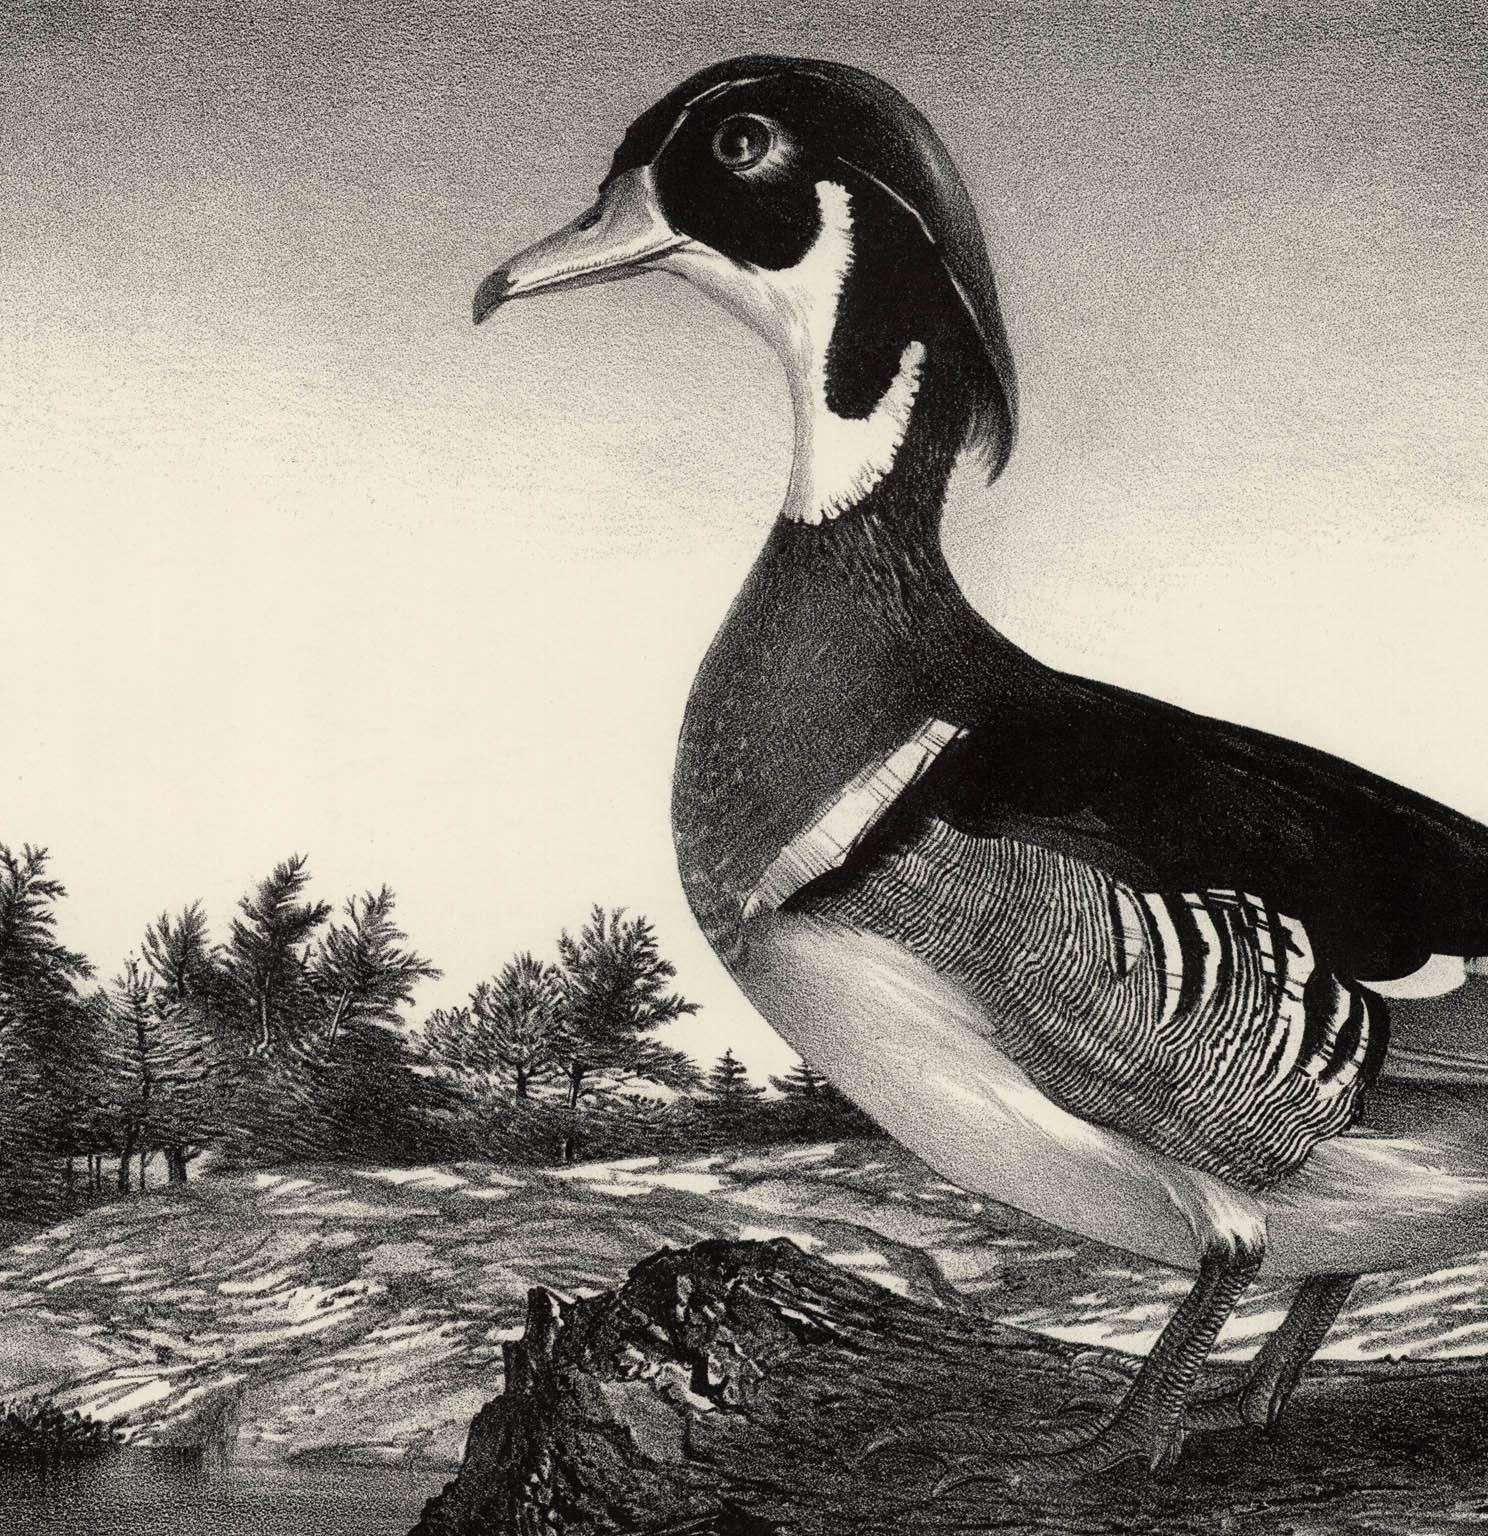 Wood Duck. - American Realist Print by Stow Wengenroth